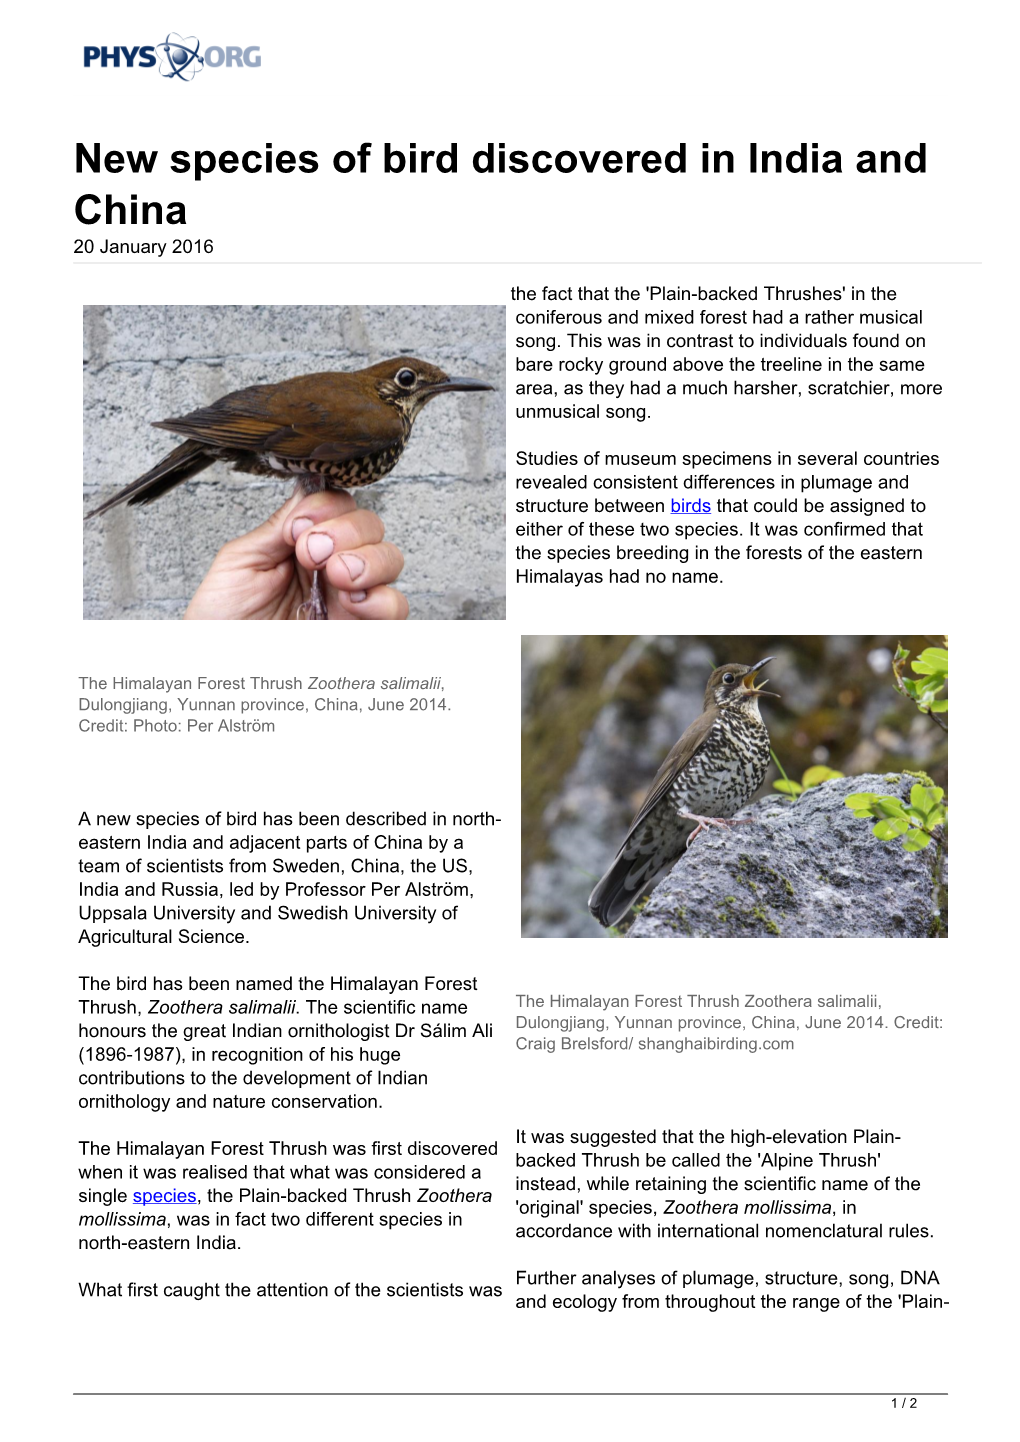 New Species of Bird Discovered in India and China 20 January 2016